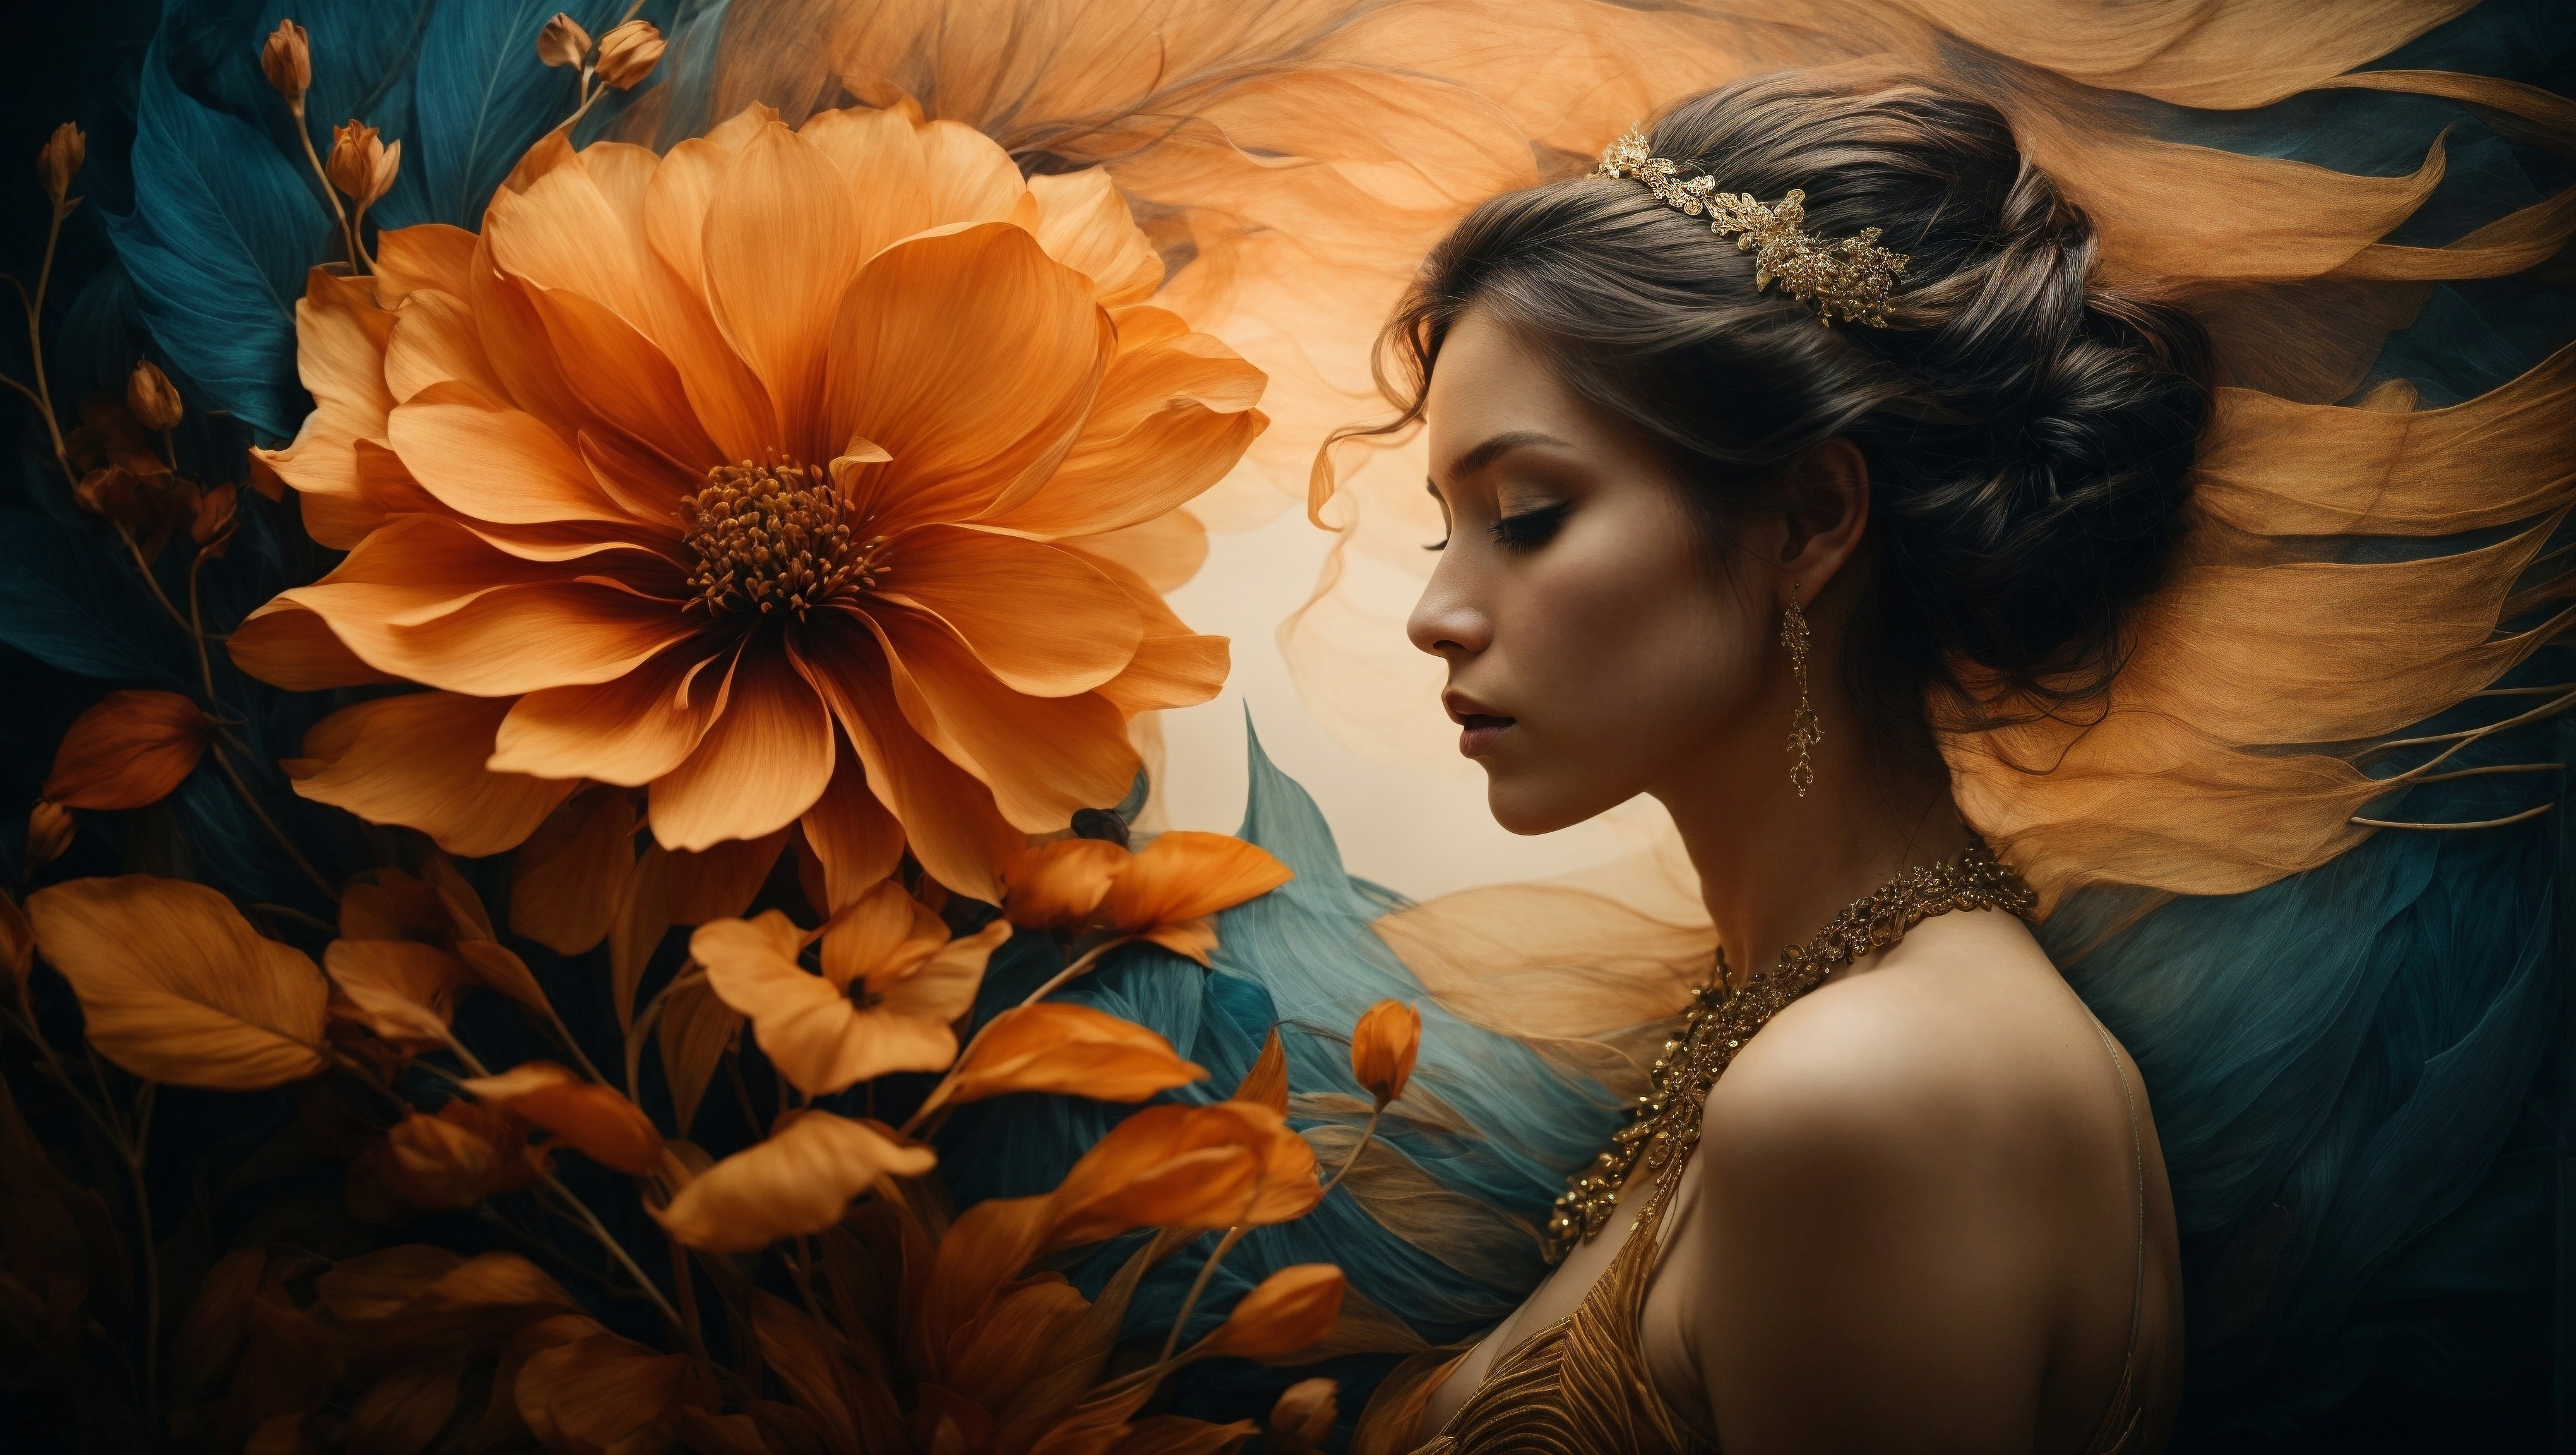 Free photo The woman with an orange flower is surrounded by bright orange flowers